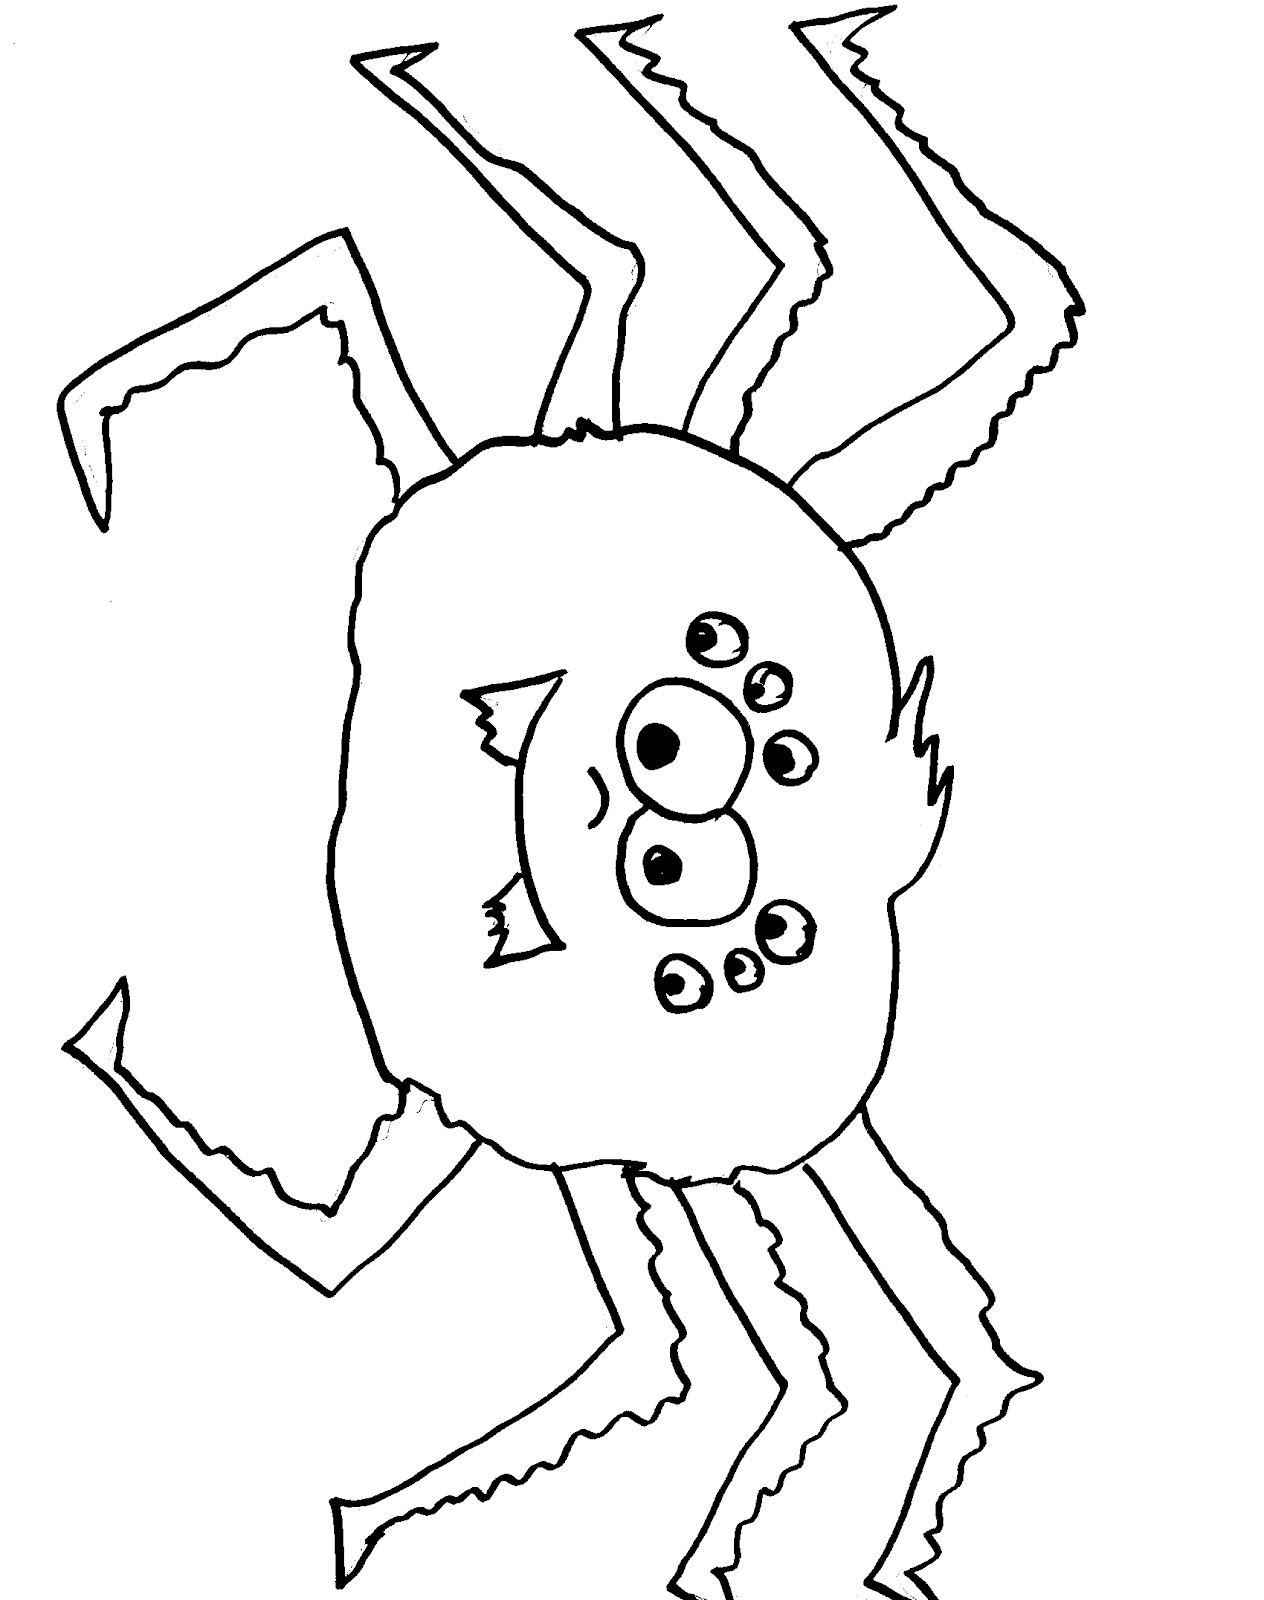  Spider Halloween coloring pages